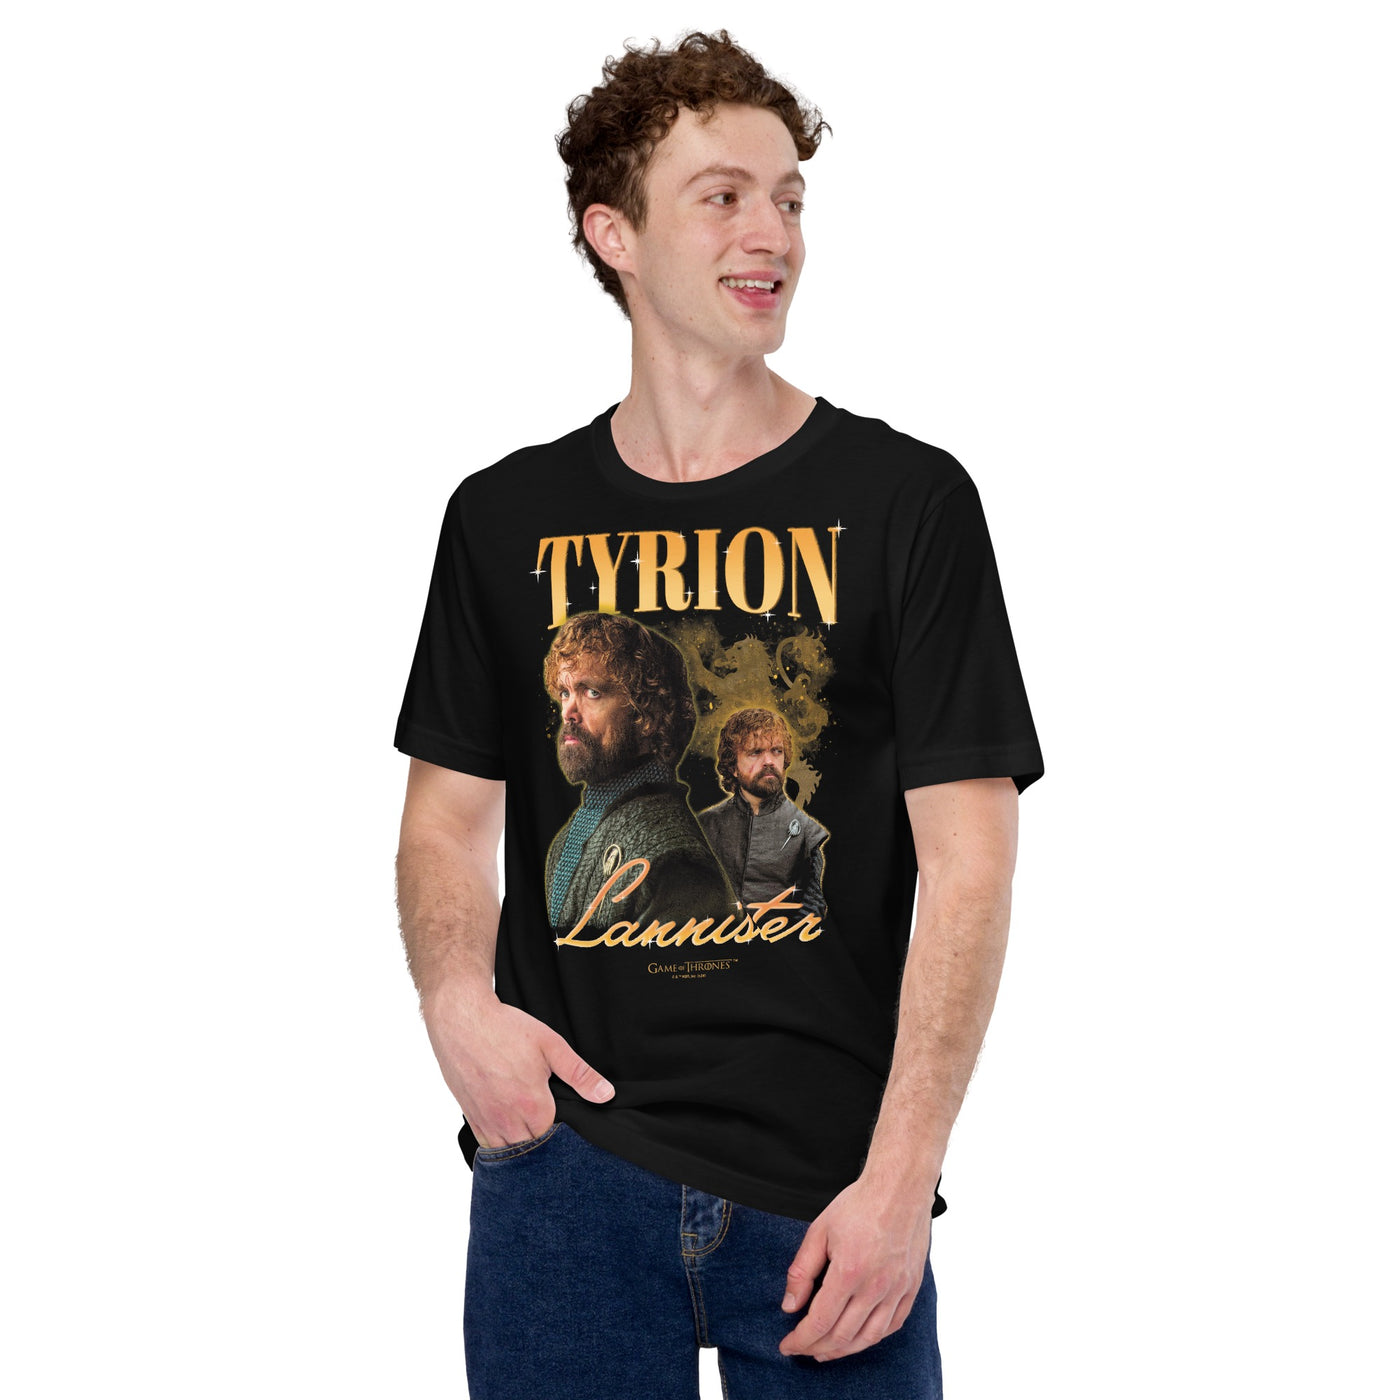 Game of Thrones Tyrion Lannister T-shirt